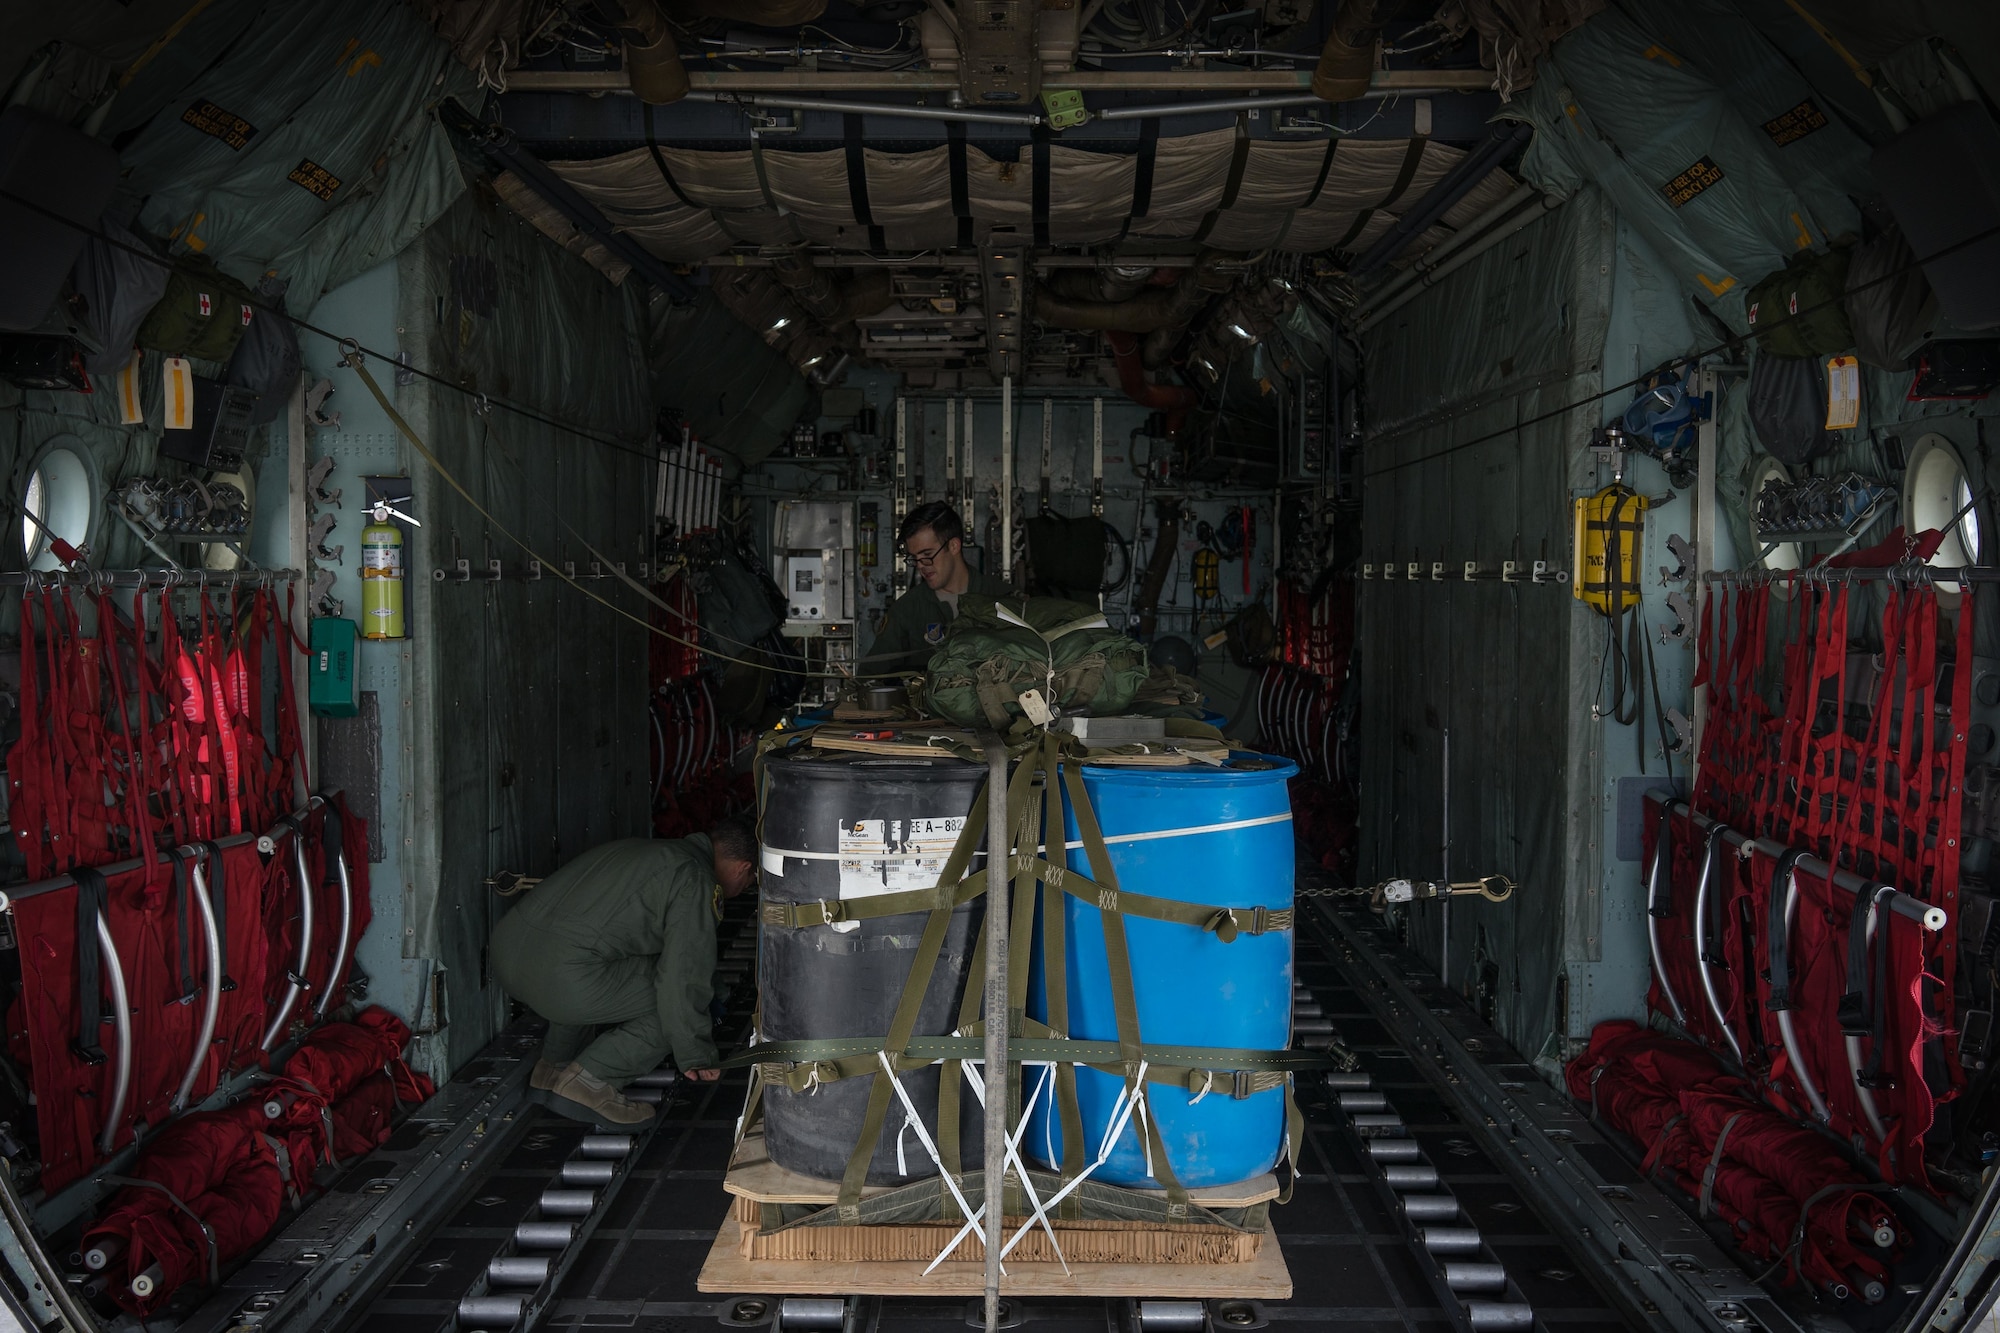 U.S. Air Force Senior Airman Angel Torres and Senior Airman Joel Eicher, 36th Airlift Squadron loadmasters, rig container delivery system bundles onto A C-130 Hercules during Red Flag Alaska on Joint Base Elmendorf-Richardson, Alaska, Aug. 12, 2016. The 36 AS uses pallets such as these to simulate airdrop procedures for supplies. (U.S. Air Force photo by Staff Sgt. Michael Smith/Released)